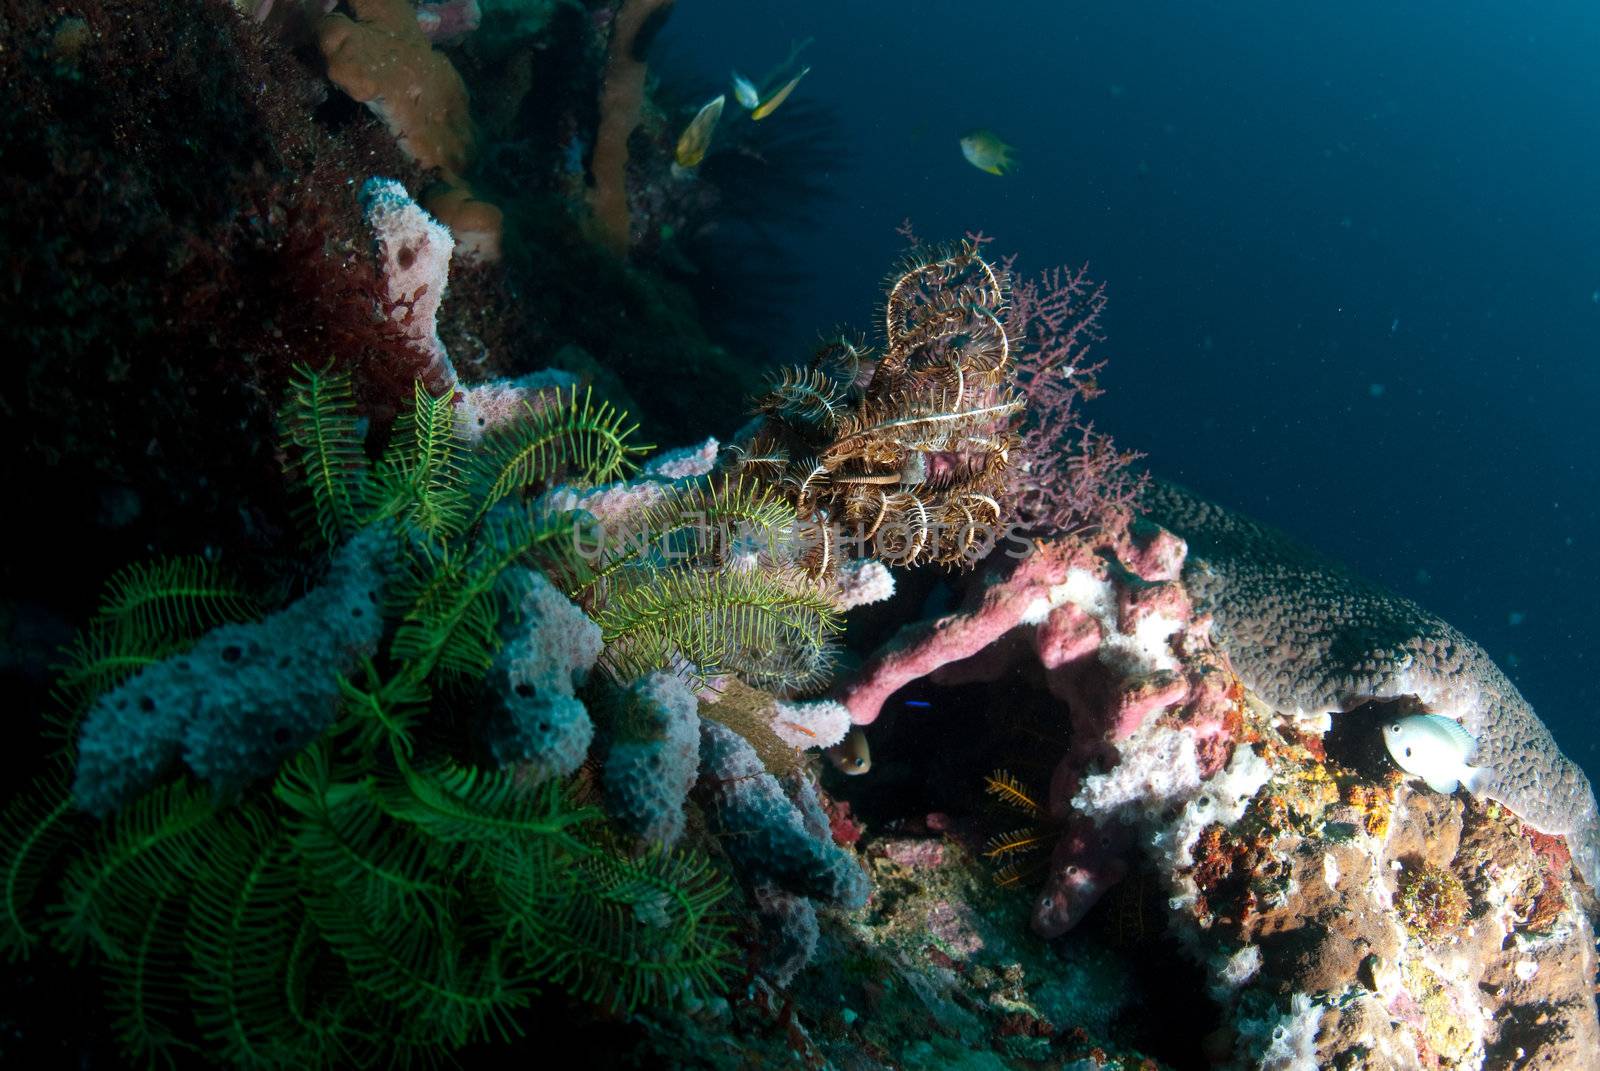 Underwater coral, fish, and plants in Bali by edan